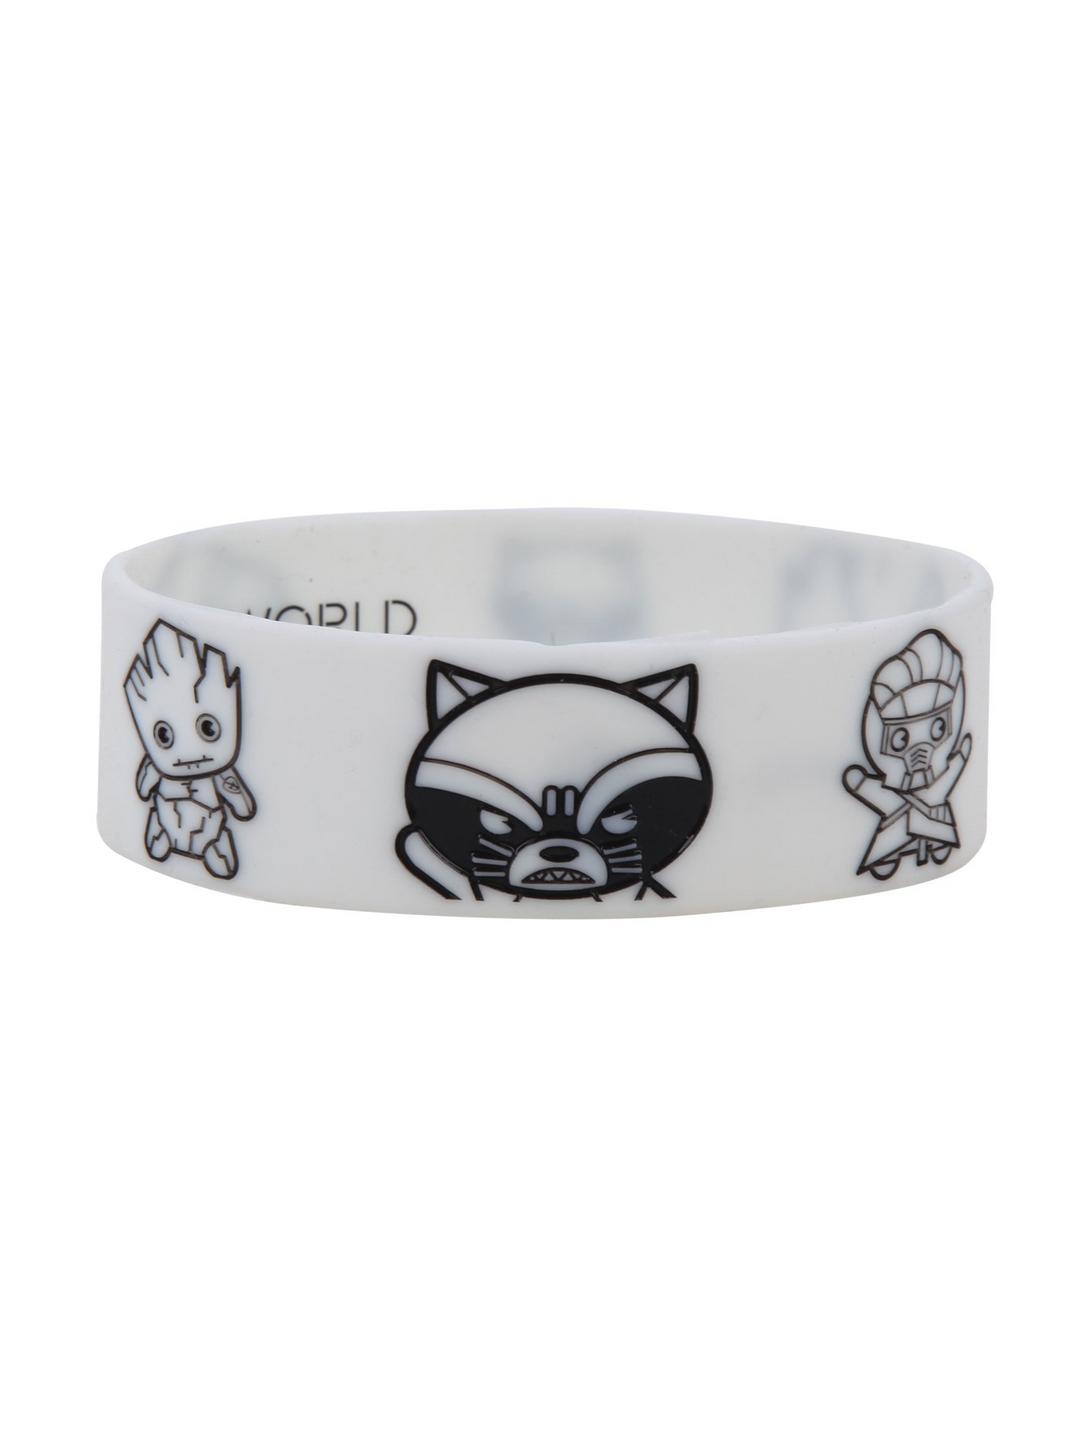 Marvel Guardians Of The Galaxy Chibi Glow-In-The-Dark Rubber Bracelet, , hi-res